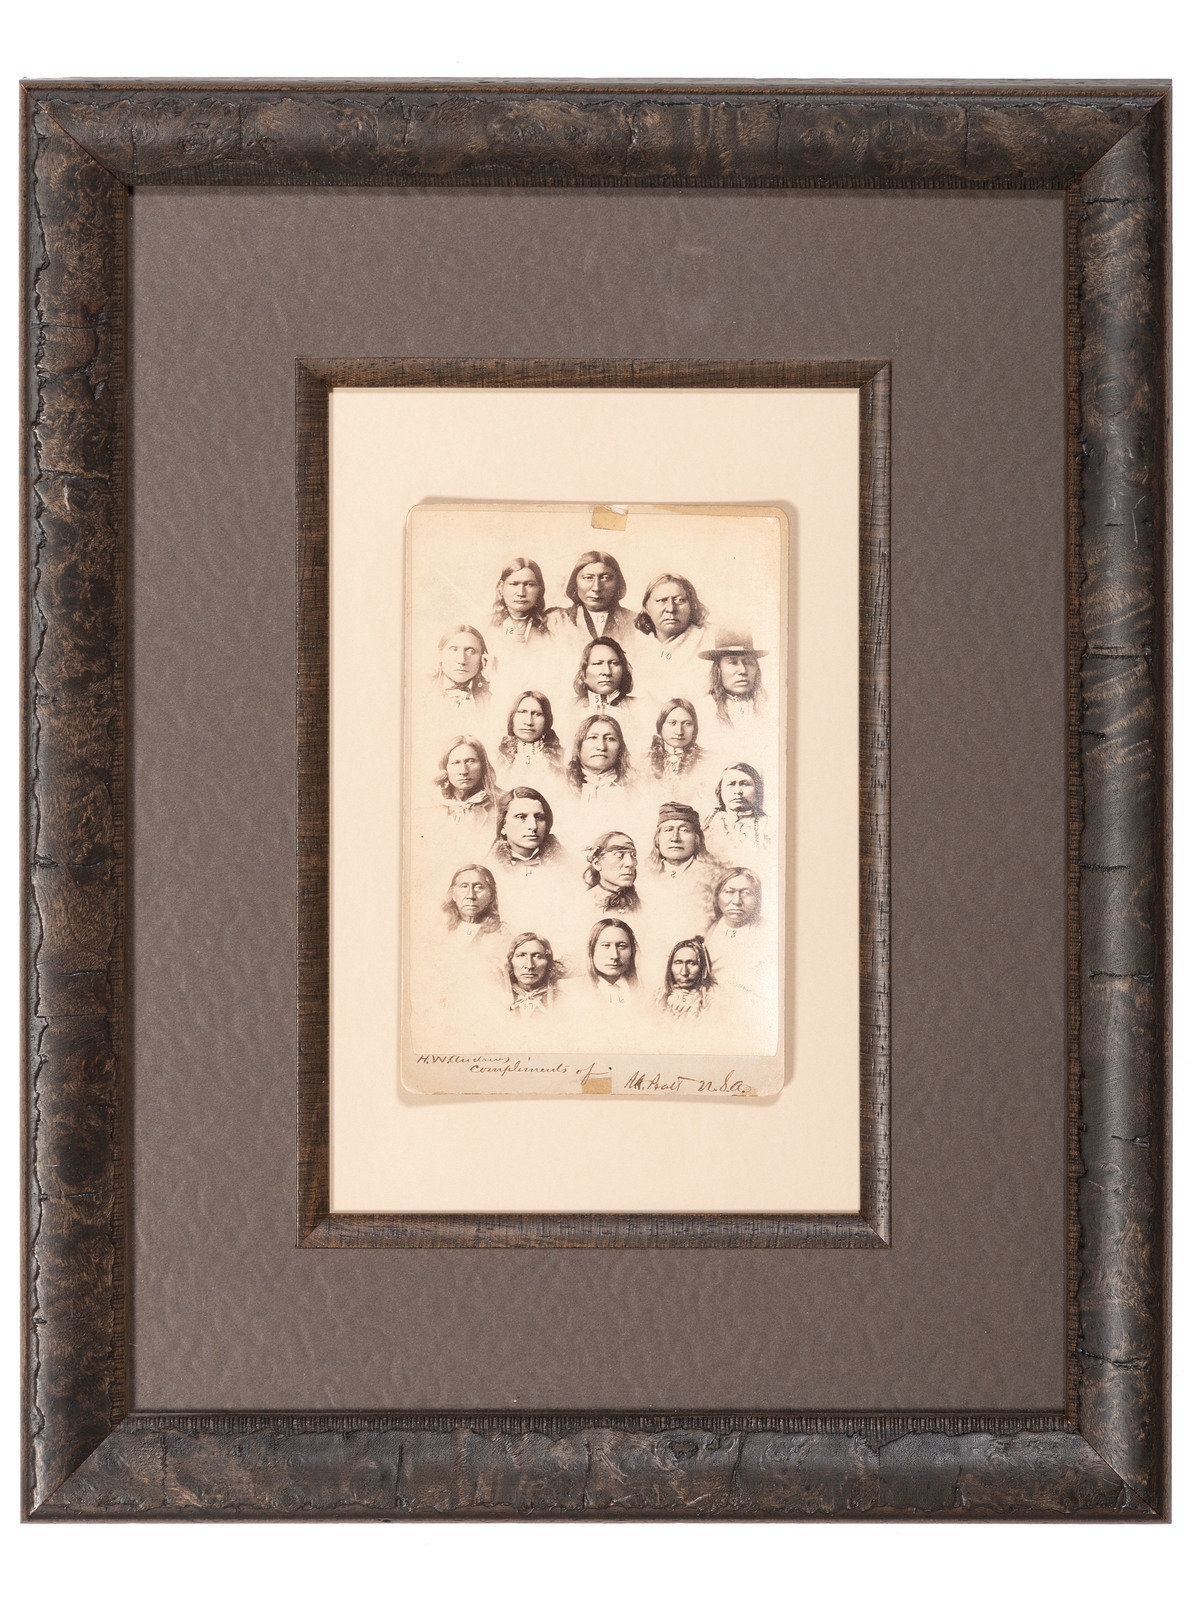 Cabinet card featuring chiefs who visited the Carlisle Indian School - John Nicholas Choate